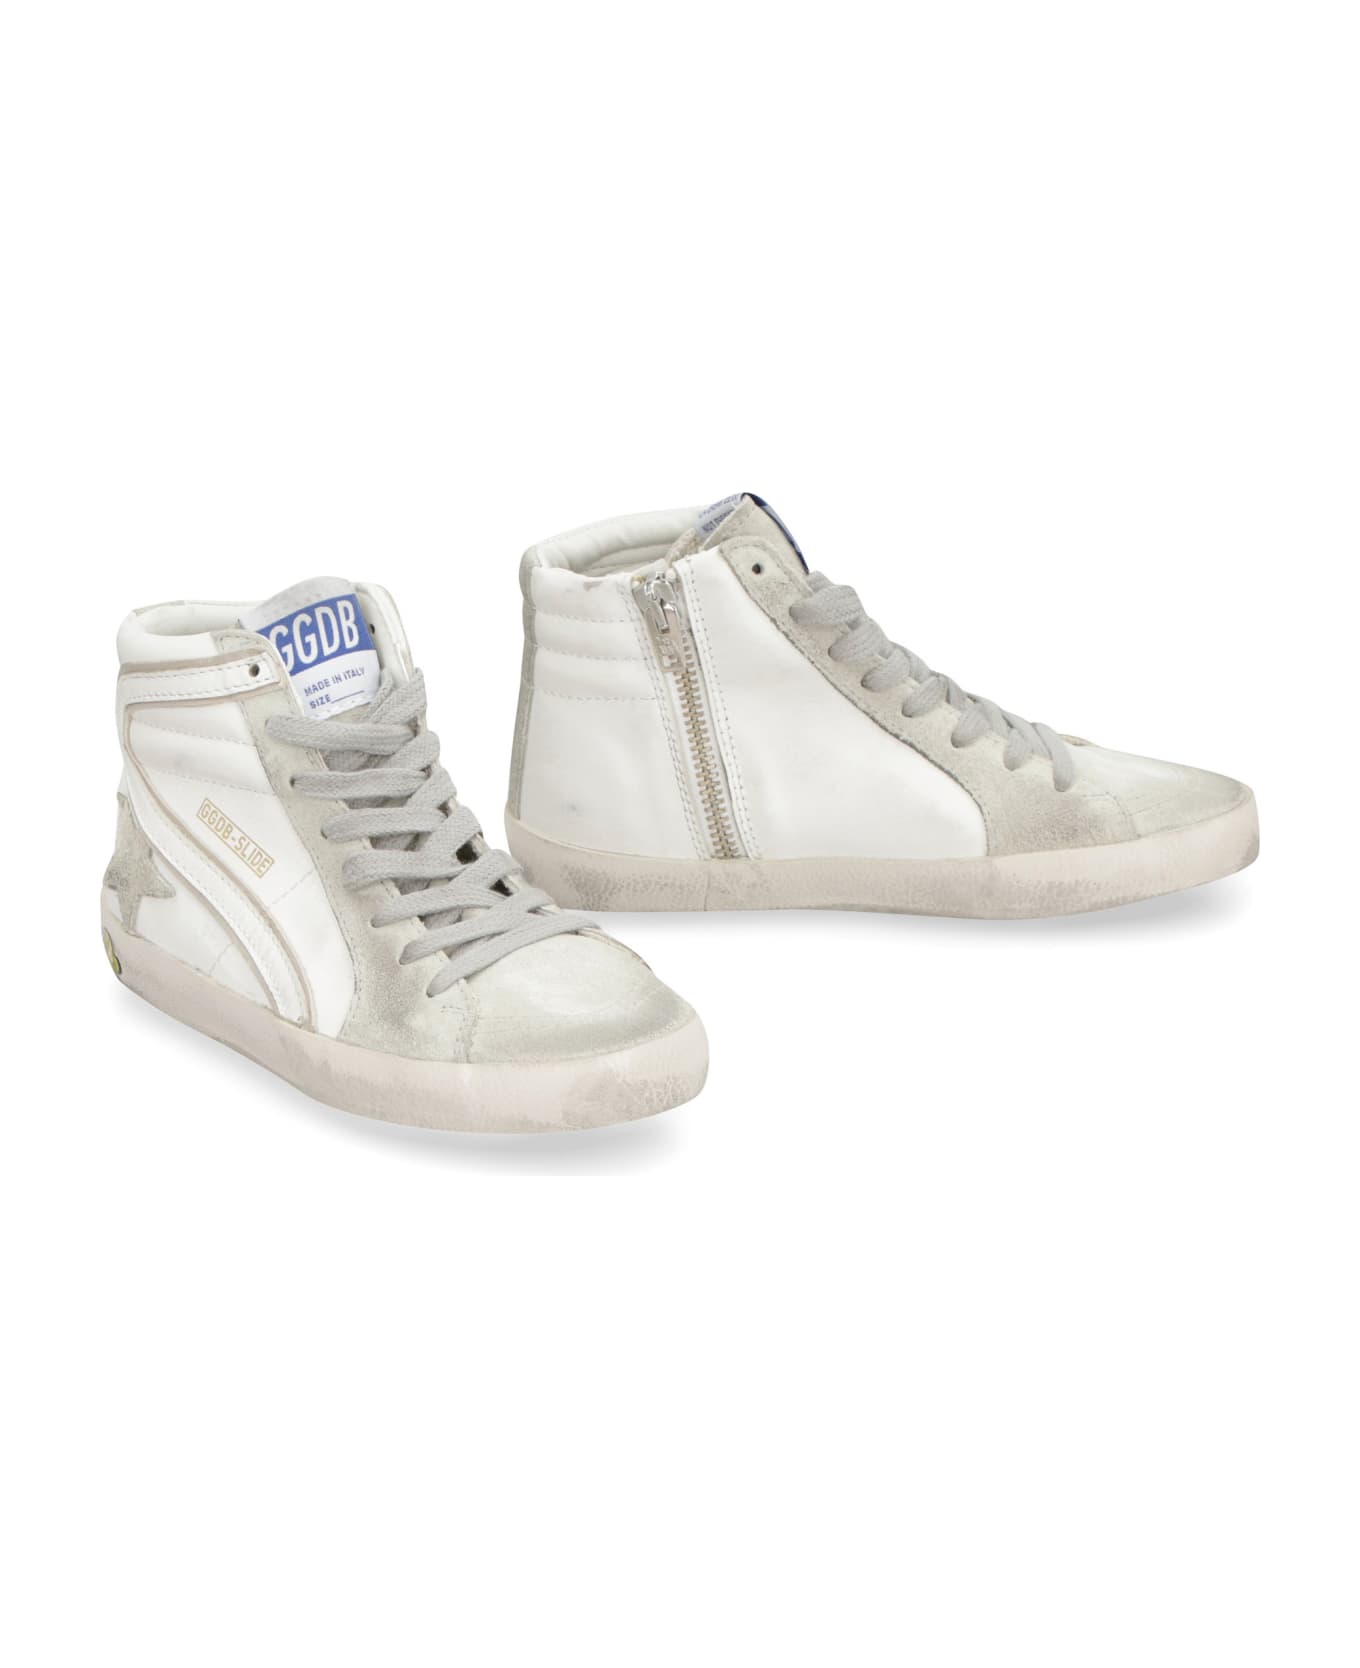 Golden Goose Slide Leather High-top Sneakers - White シューズ